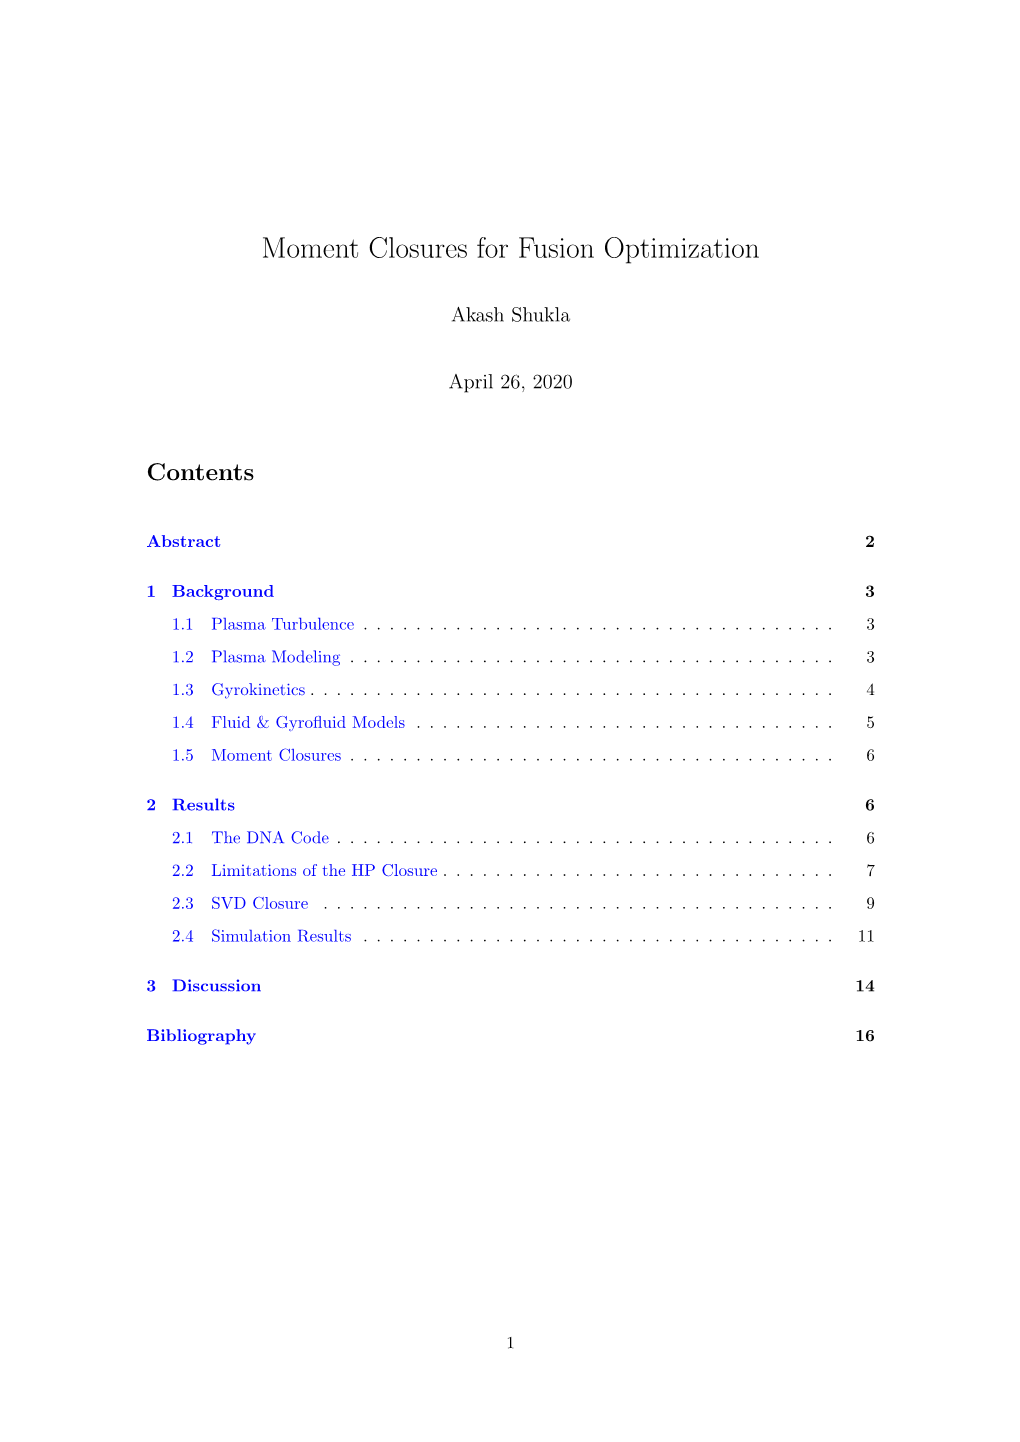 Moment Closures for Fusion Optimization